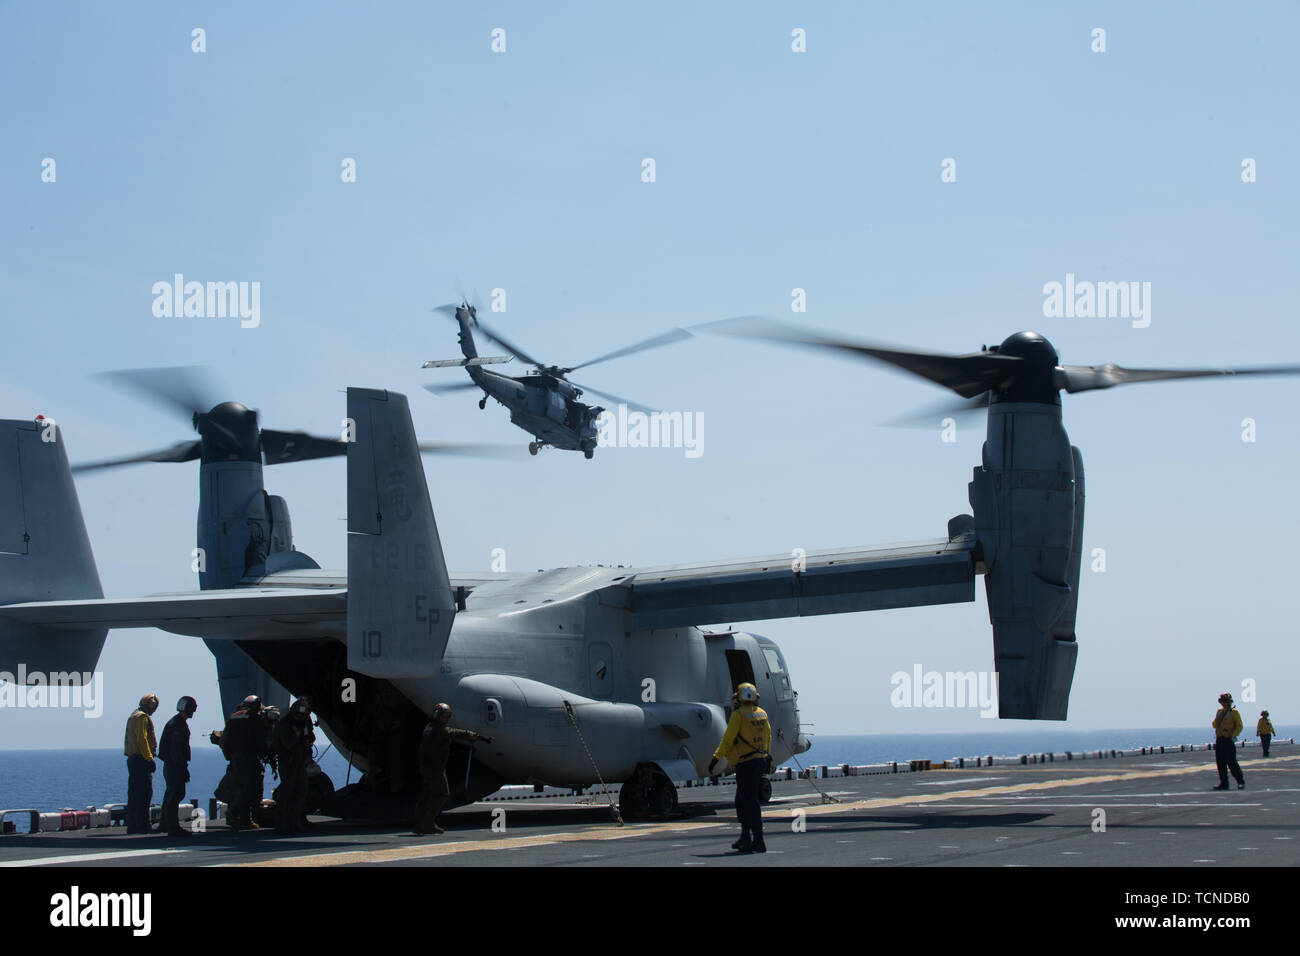 An MH-60S Seahawk takes off as Marines and Sailors with the 31st Marine Expeditionary Unit and the amphibious assault ship USS Wasp (LHD 1) unload supplies from an MV-22B Osprey tiltrotor aircraft while underway in the Philippine Sea, June 5, 2019. The 31st Marine Expeditionary Unit, the Marine Corps` only continuously forward-deployed MEU, provides a flexible and lethal force ready to perform a wide range of military operations as the premier crisis response force in the Indo-Pacific region. (Official U.S. Marine Corps photo by Lance Cpl. Kenny Nunez Bigay) Stock Photo